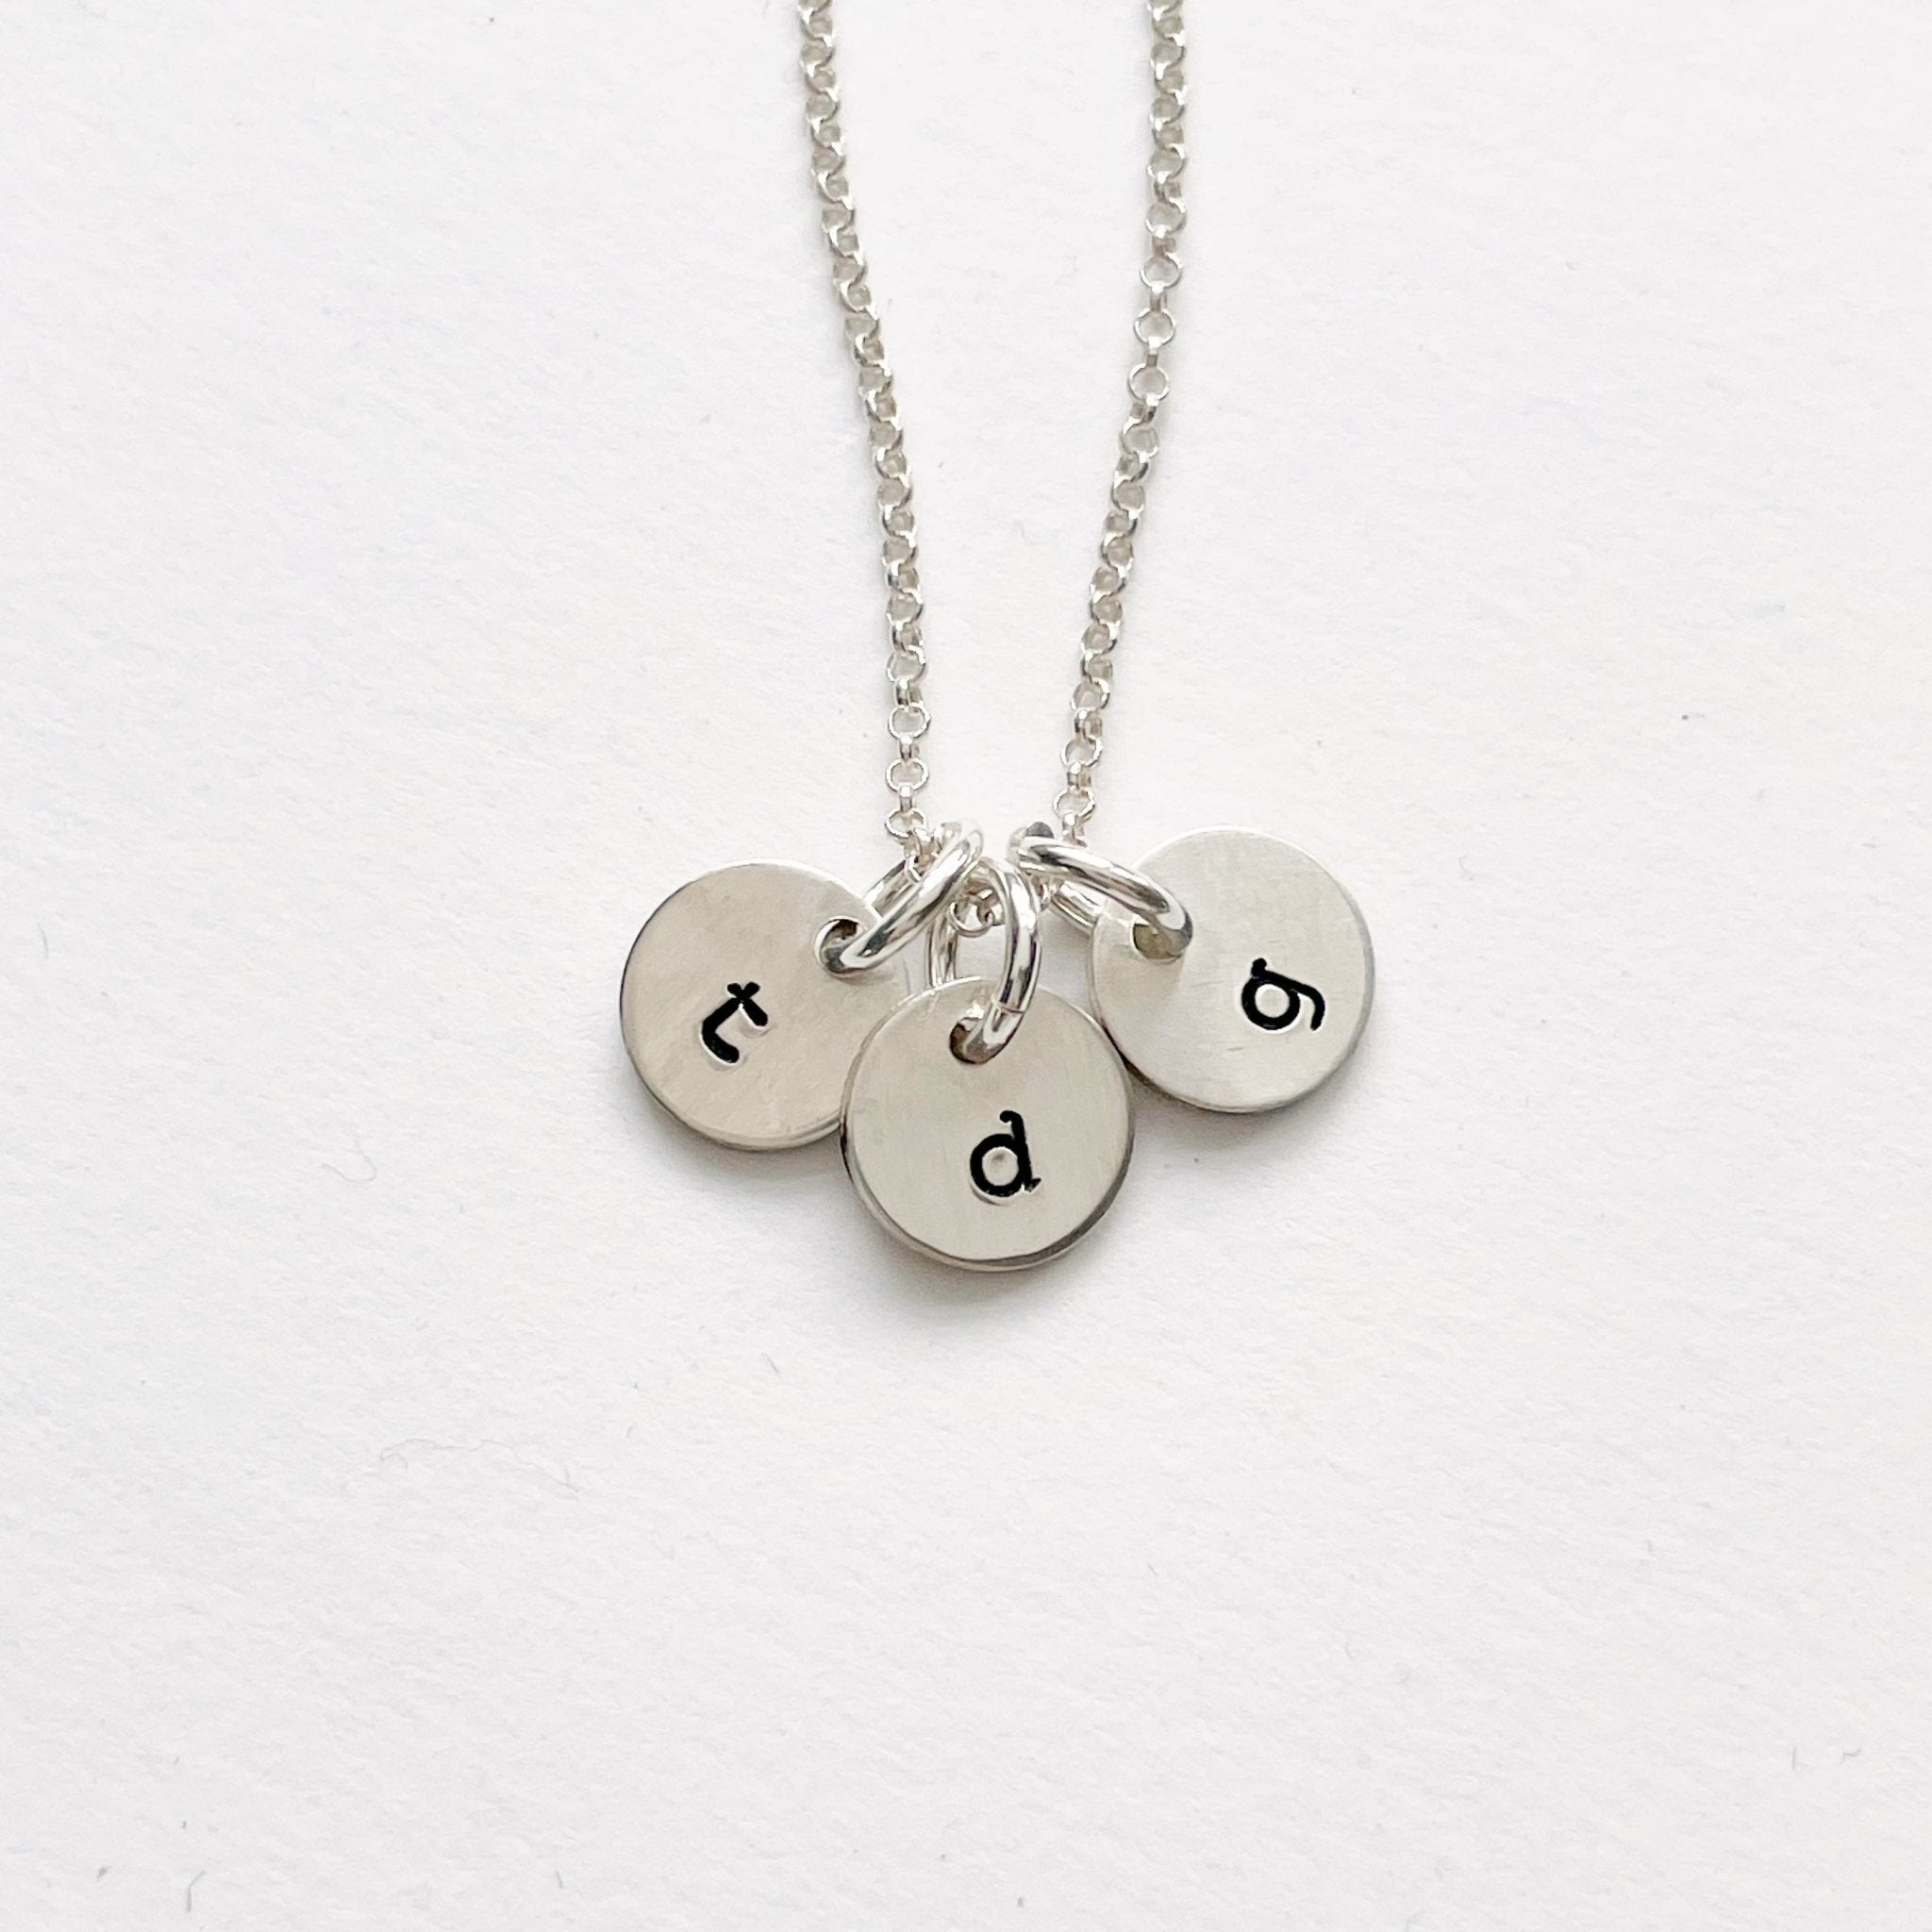 Silver stamped disc personalized initial necklace with 3 silver stamped discs with initials. Tabby Necklace by Sarah Cornwell Jewelry